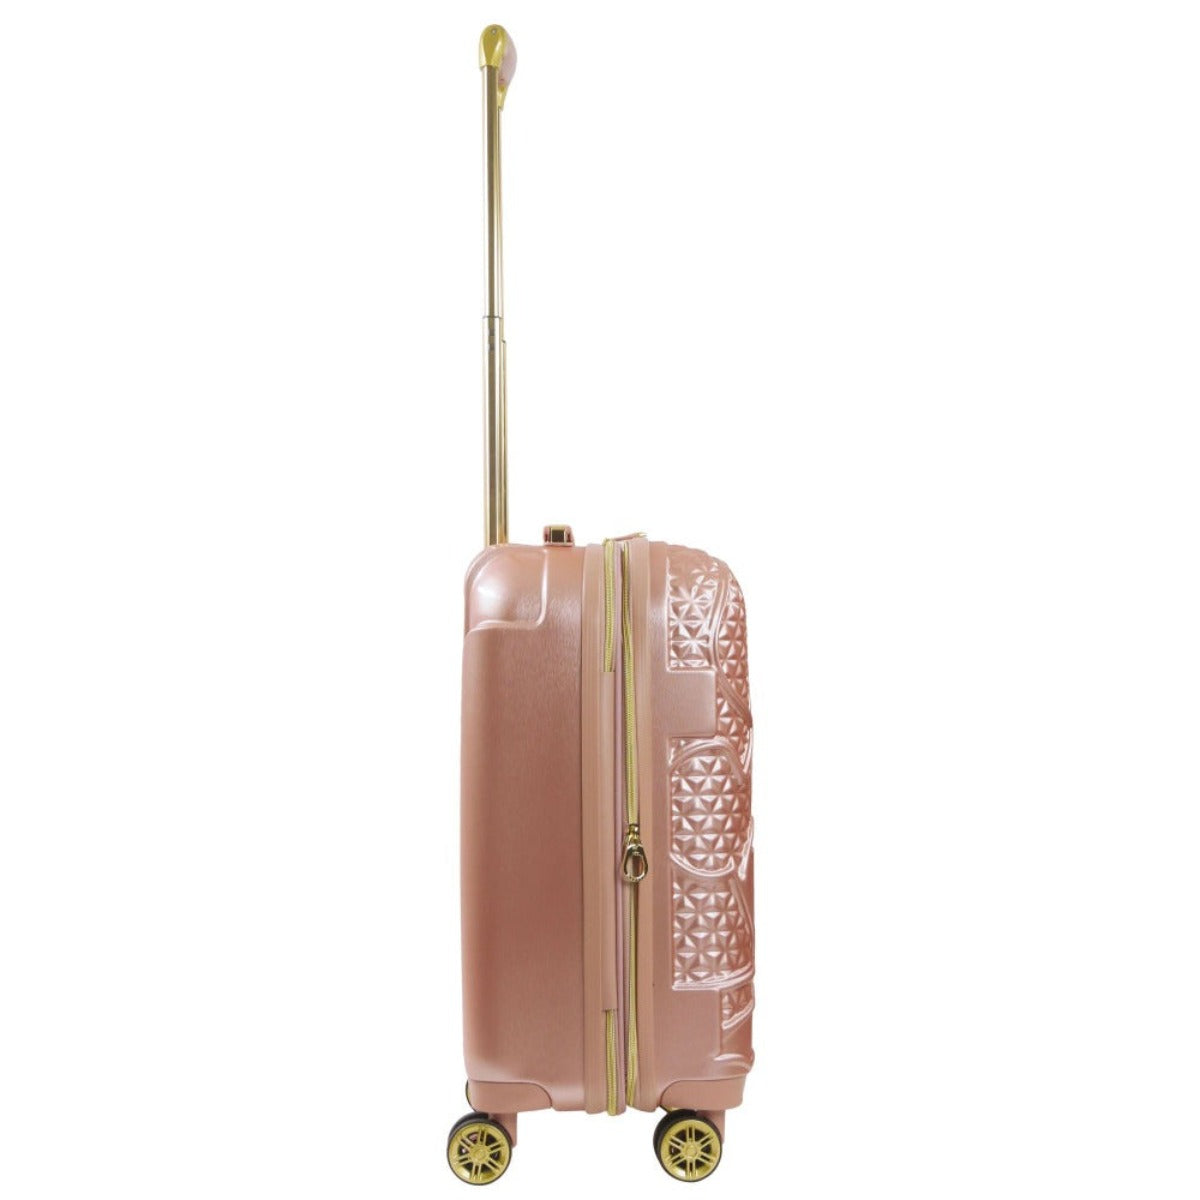 Ful Disney Textured Mickey Mouse 29in Hard Sided Rolling Luggage, Rose Gold